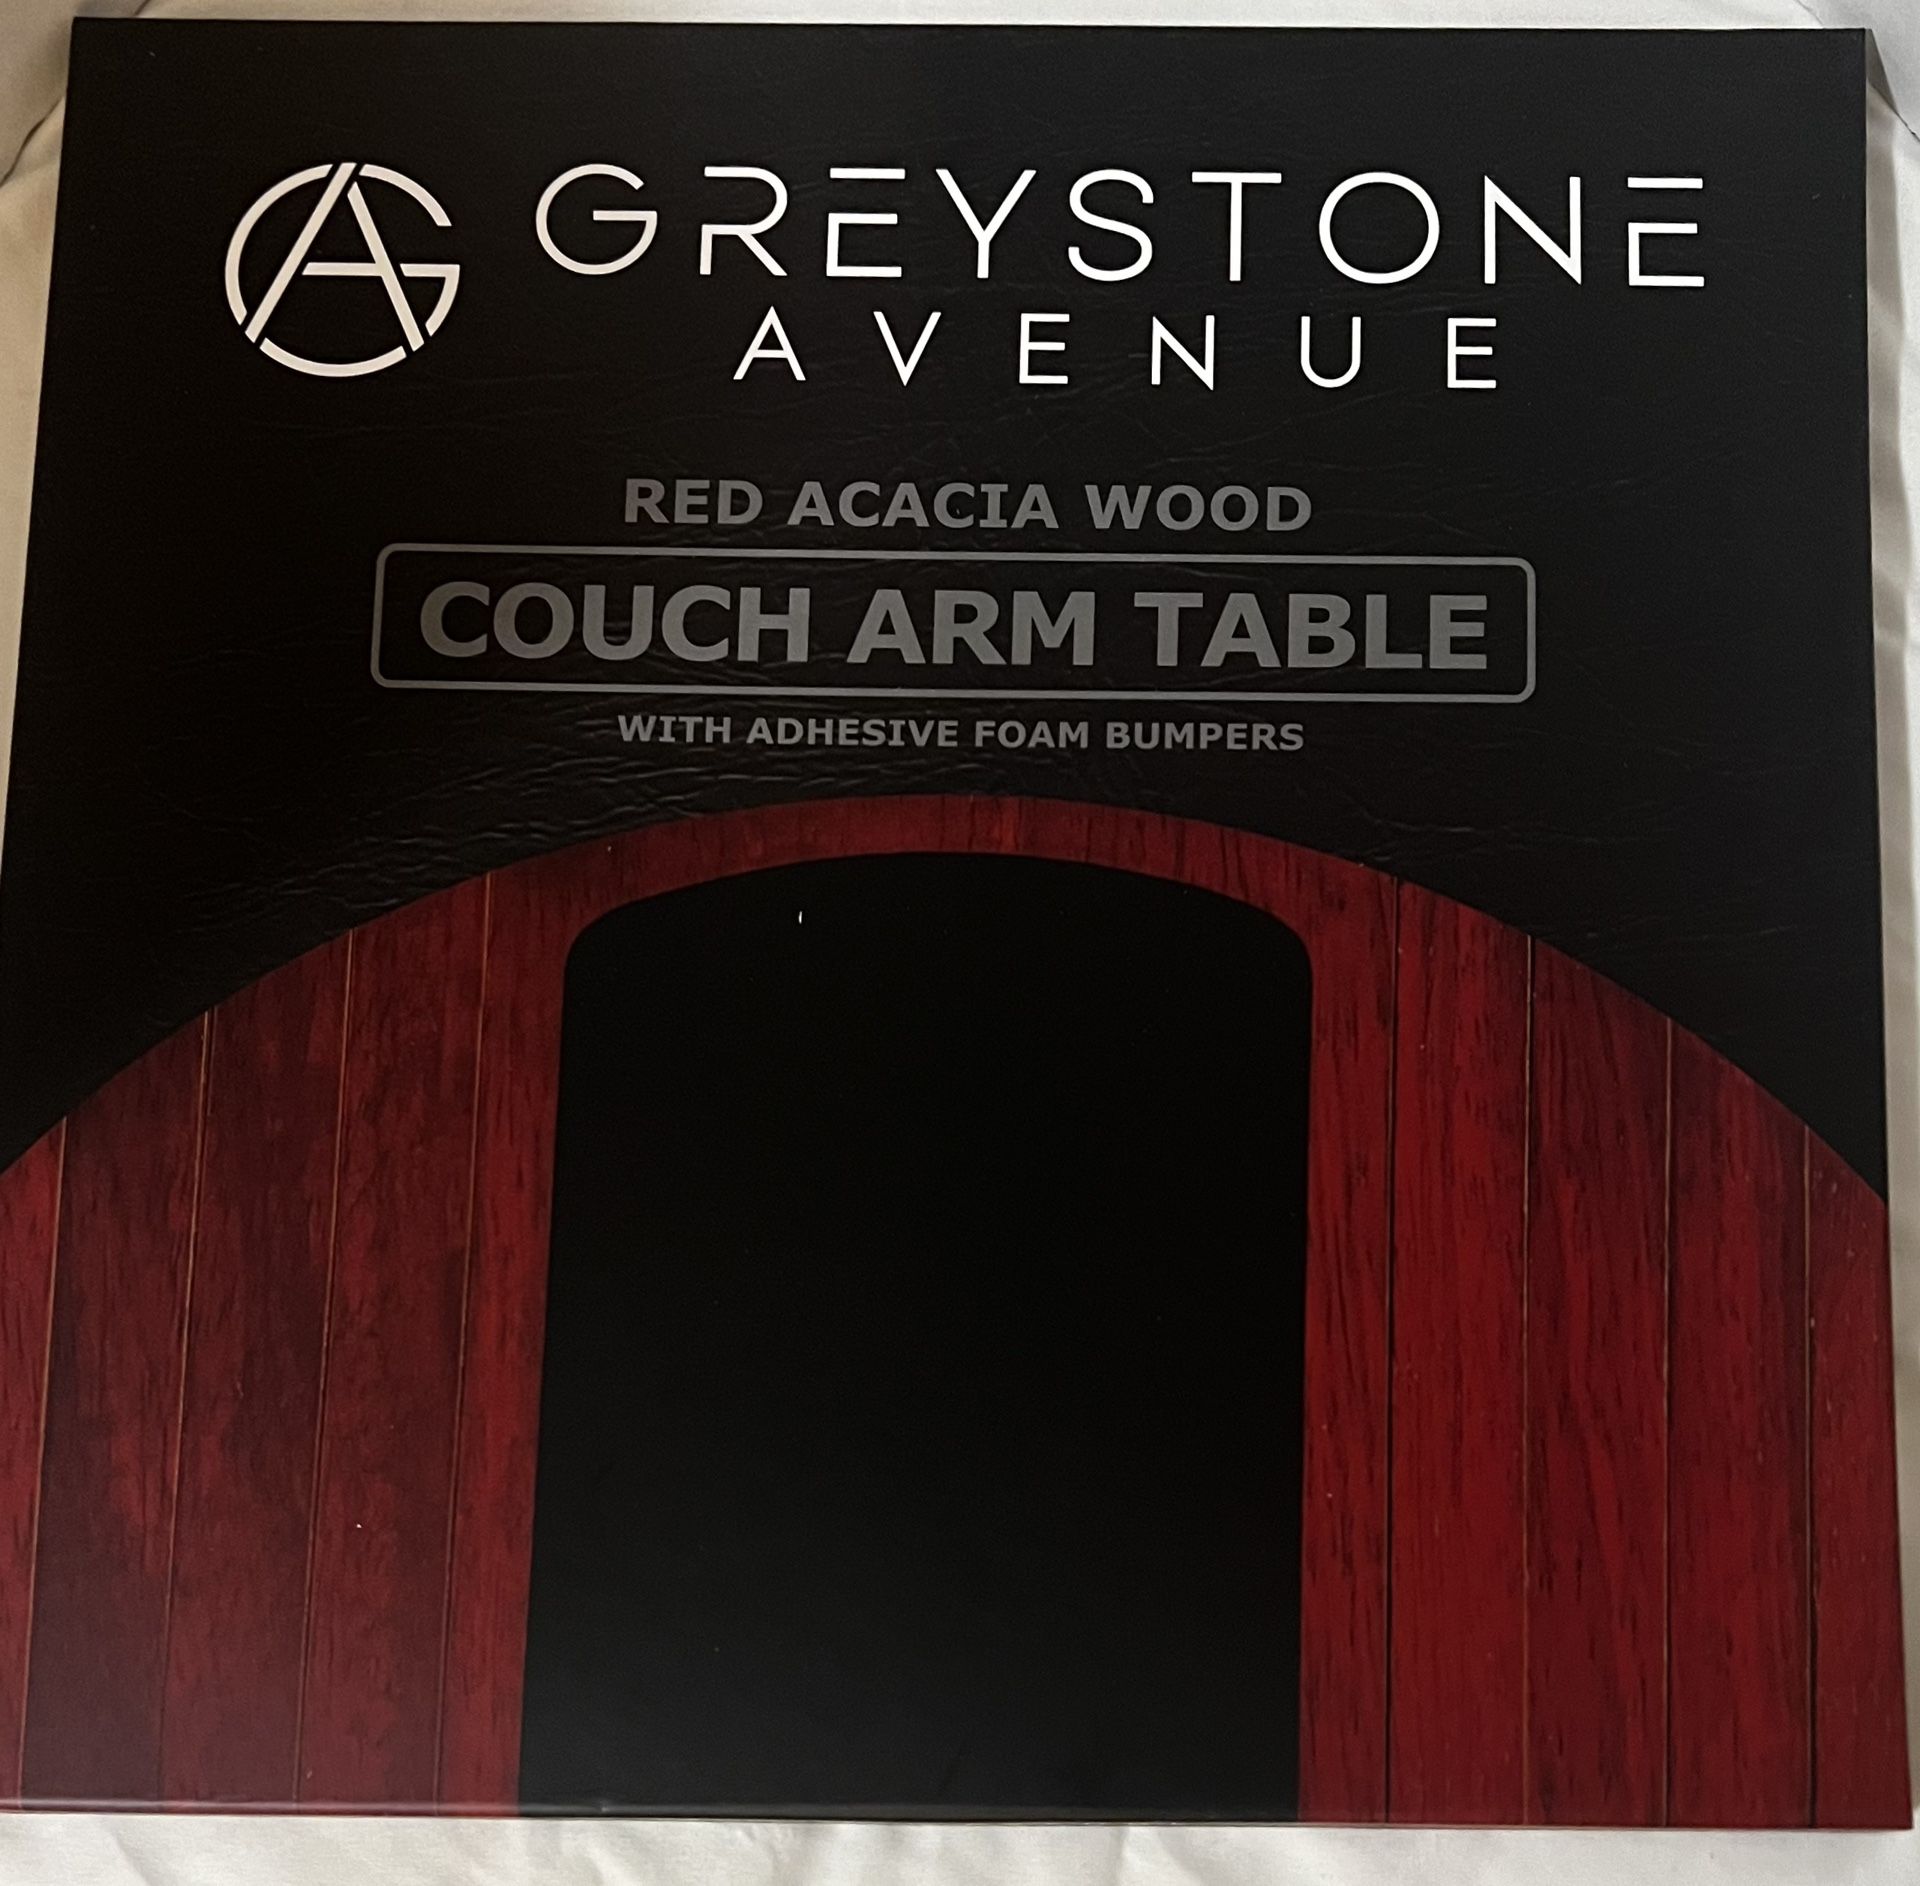 Greystone Ave. Cherry Couch Arm Table - Non-Slip Silicone Top & Waterproof Base Sofa Arm Tray, 